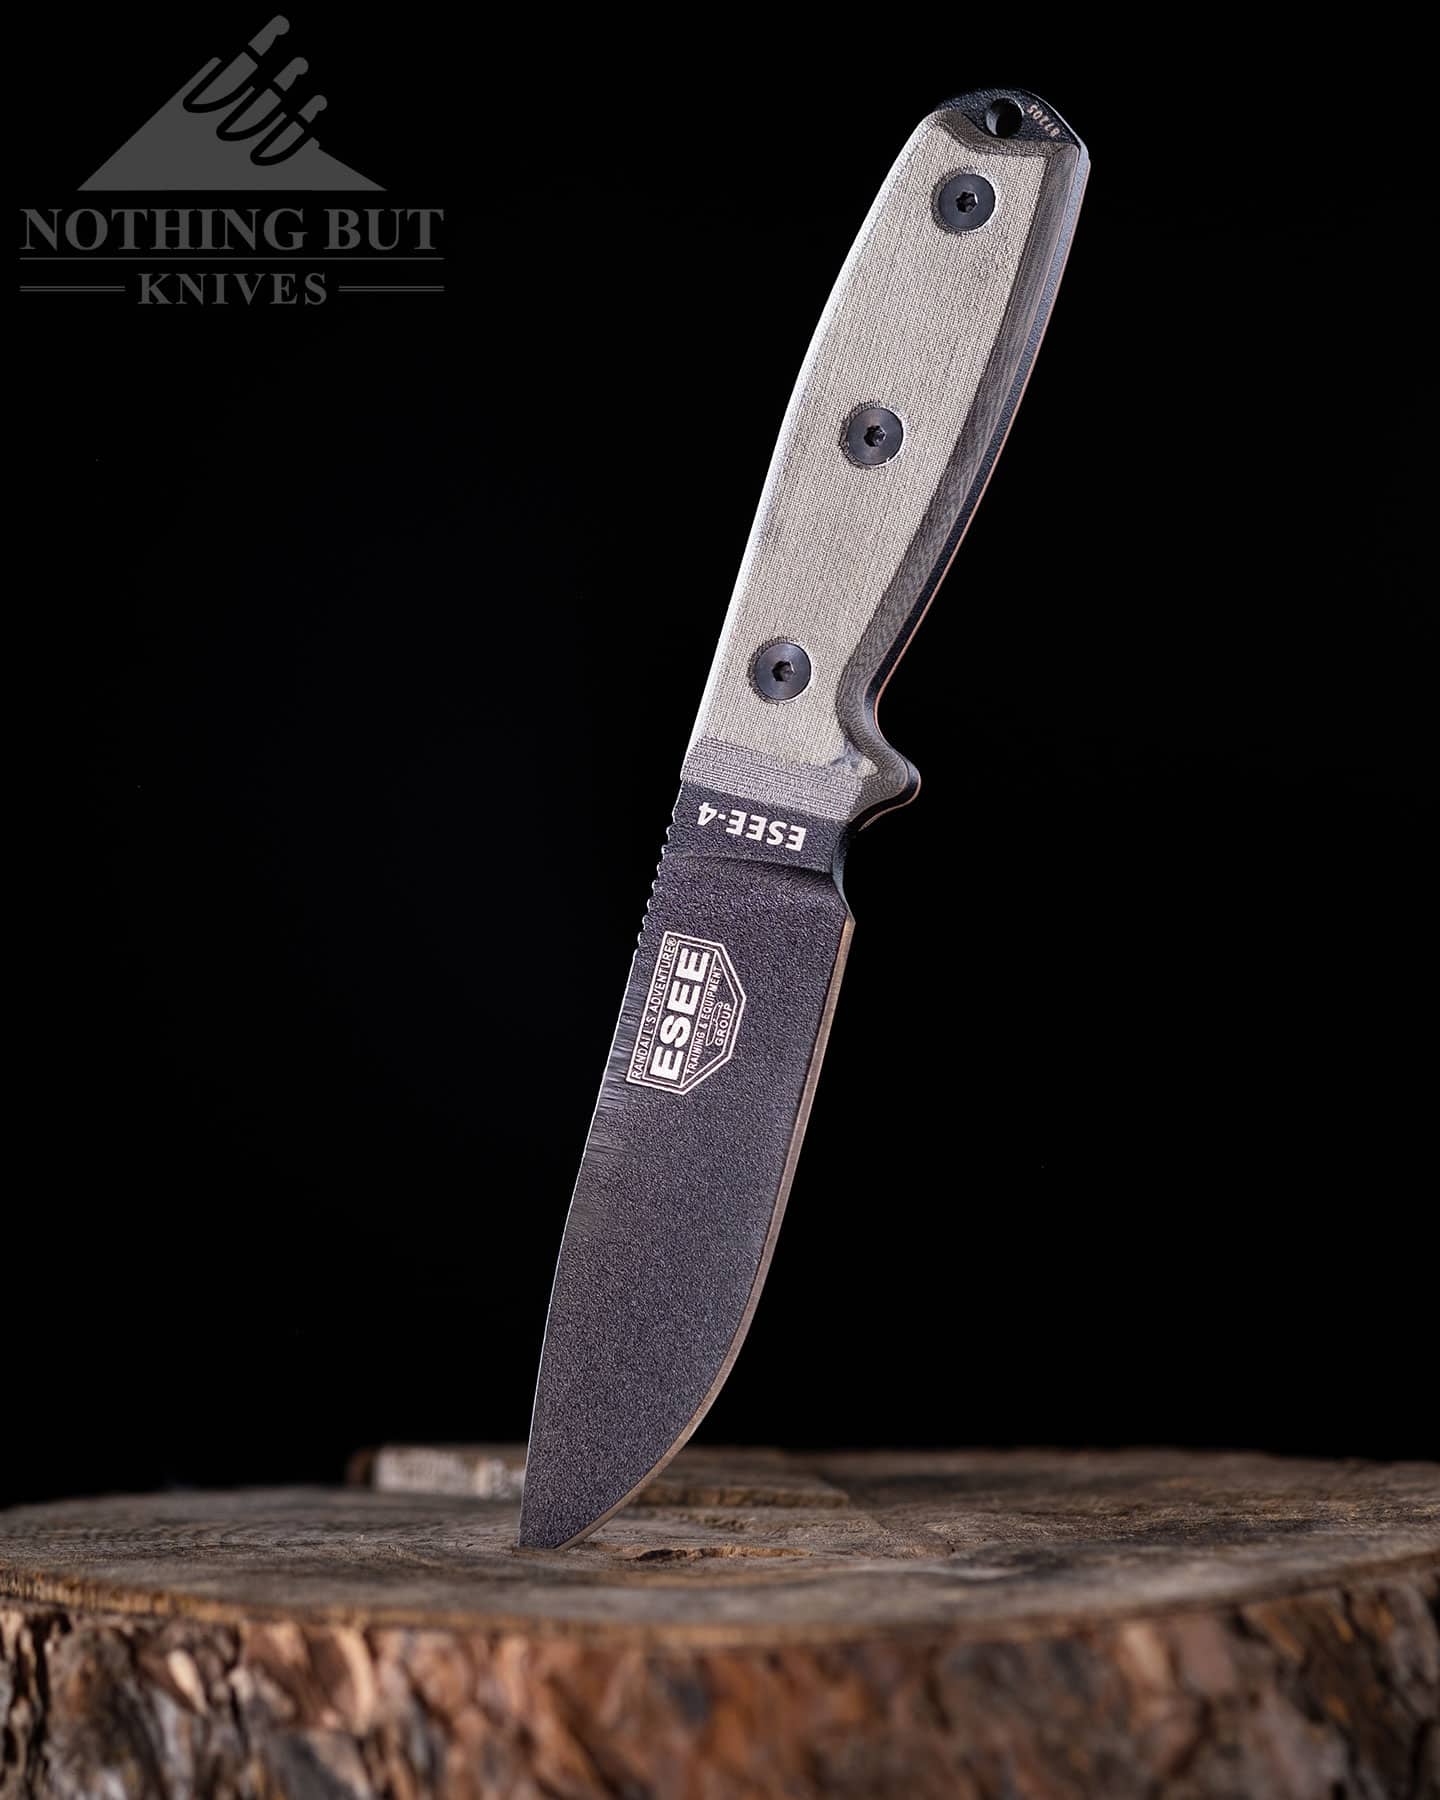 The Esee 4 is a popular survival knife that can also be used as a tactical self defense knife. 